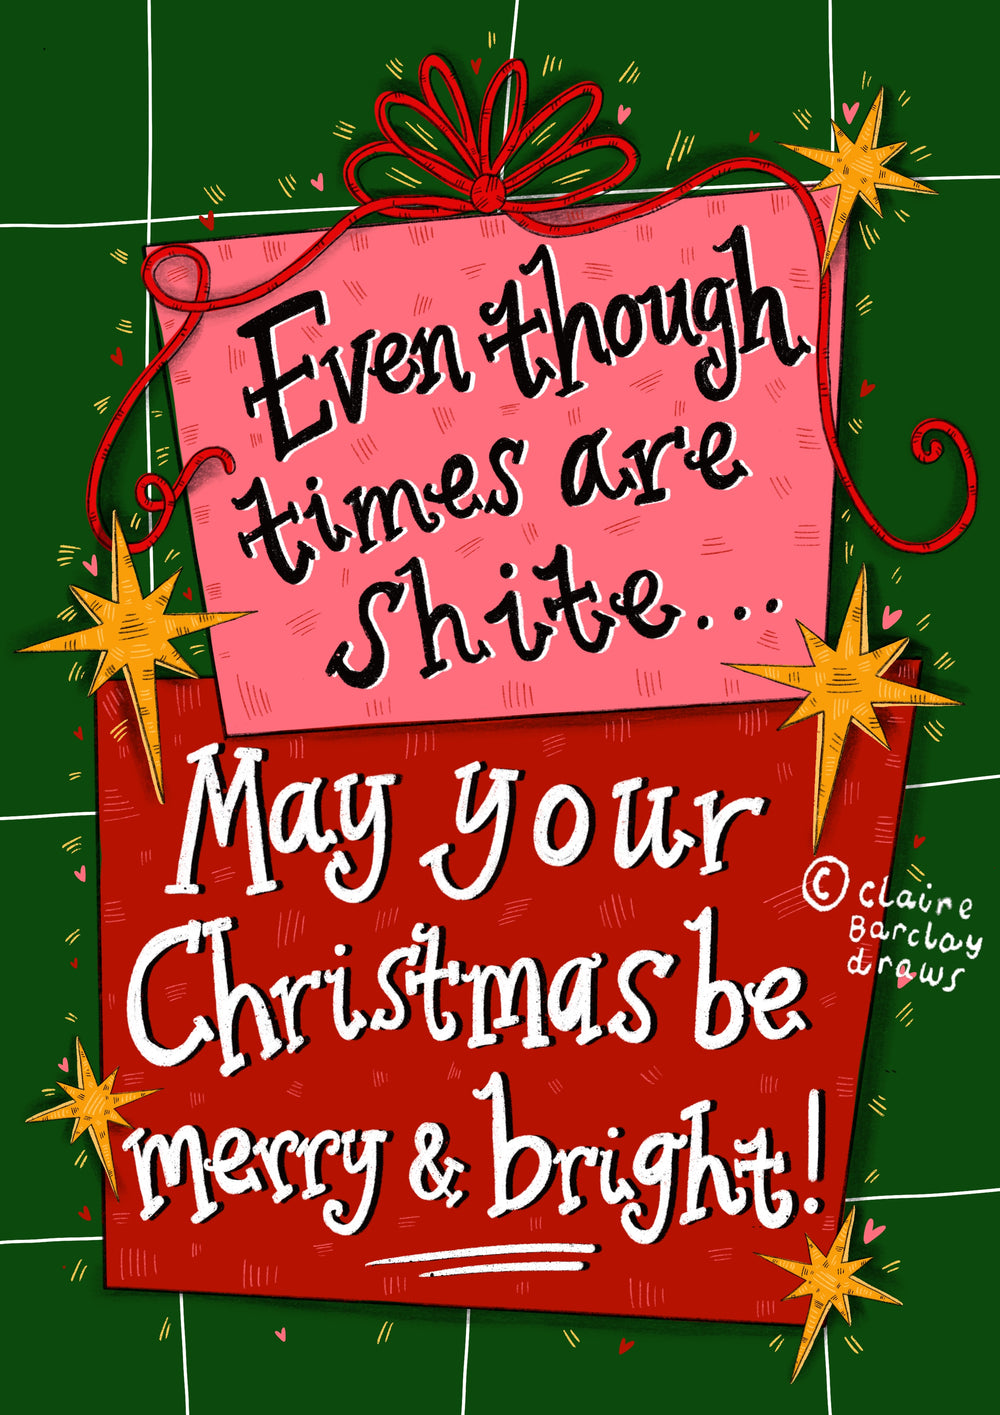 Even though times are sh*te…..May your Christmas be Merry and Bright! Xmas Tree Decoration